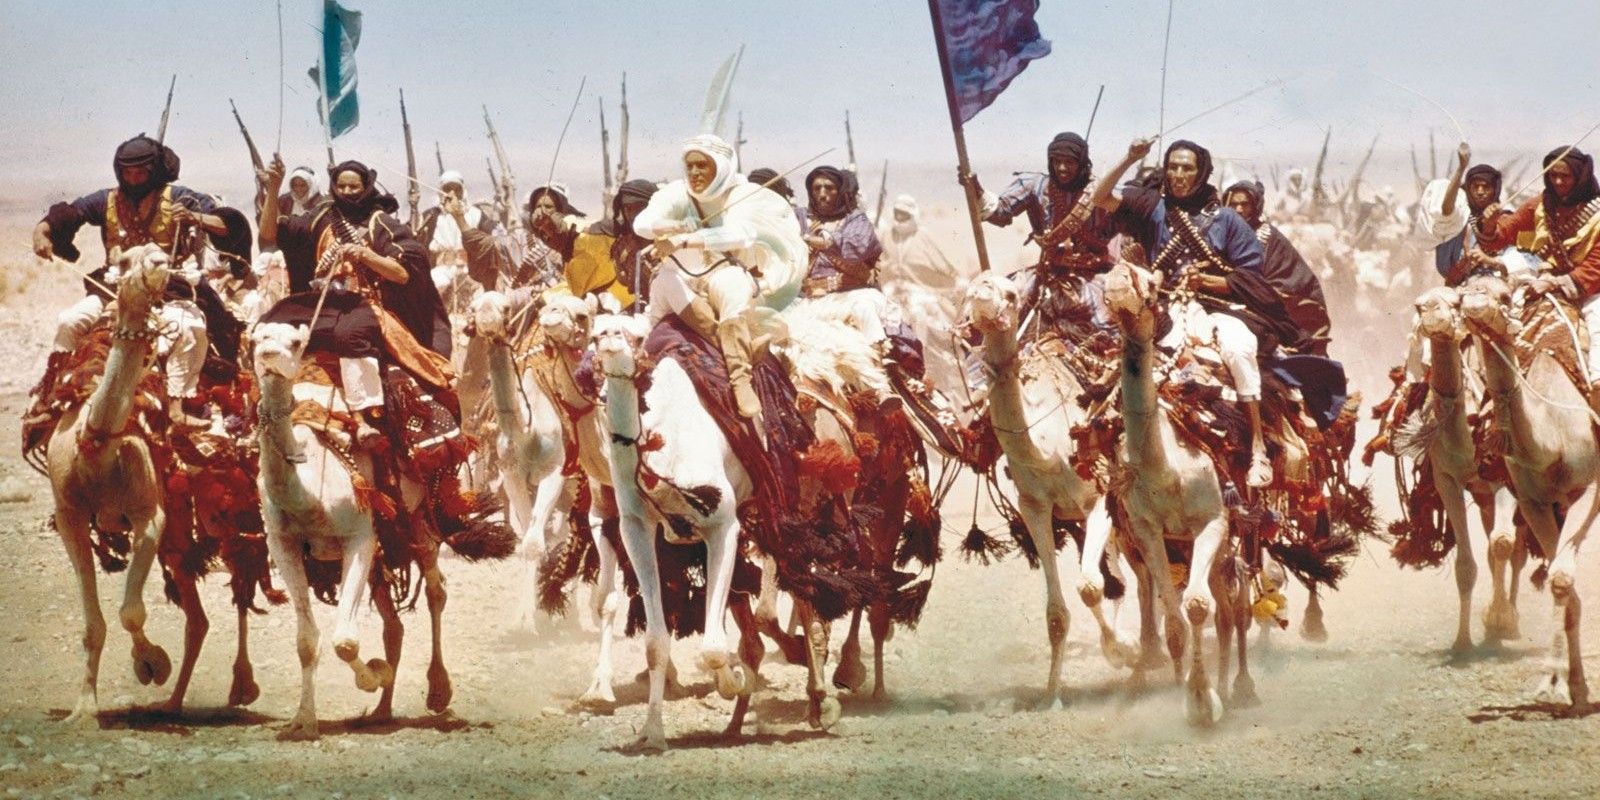 Charging into battle in Lawrence of Arabia